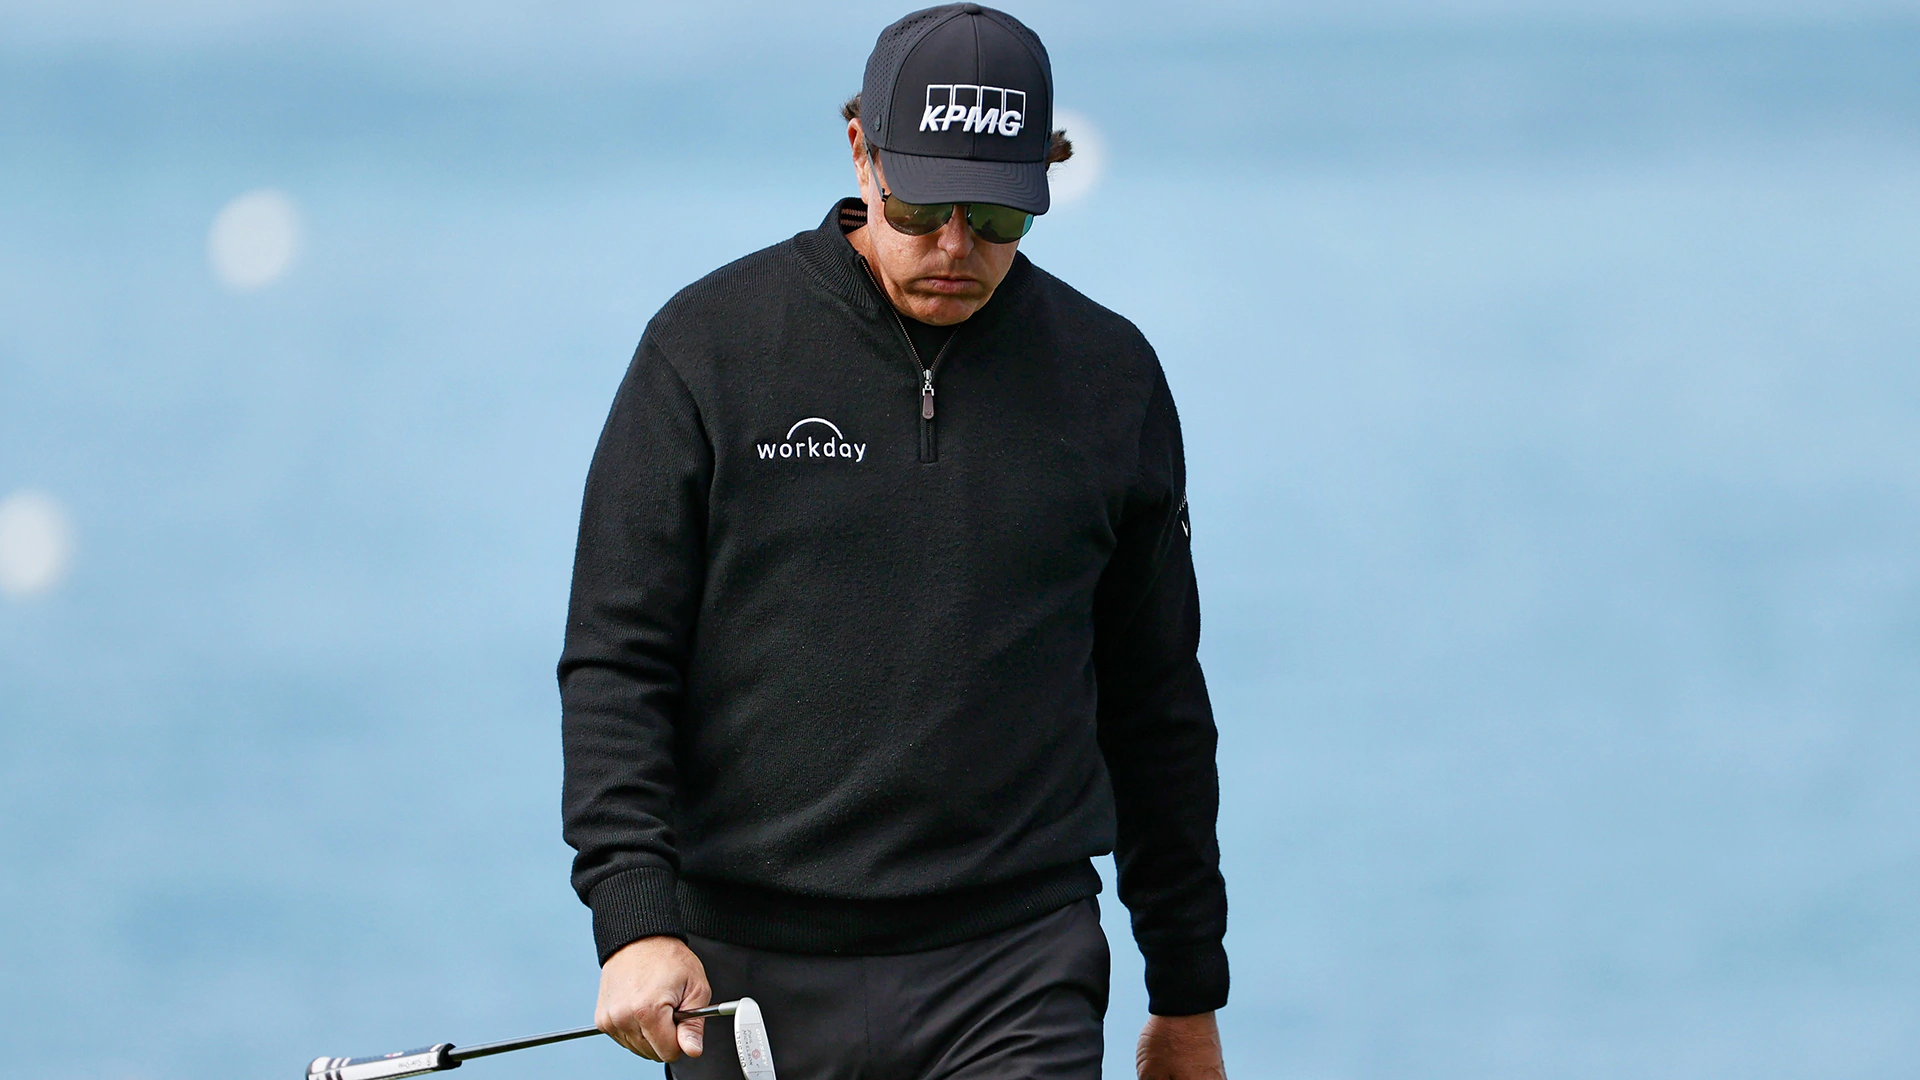 Phil Mickelson out of top 100, Rory McIlroy out of top 10 in world rankings